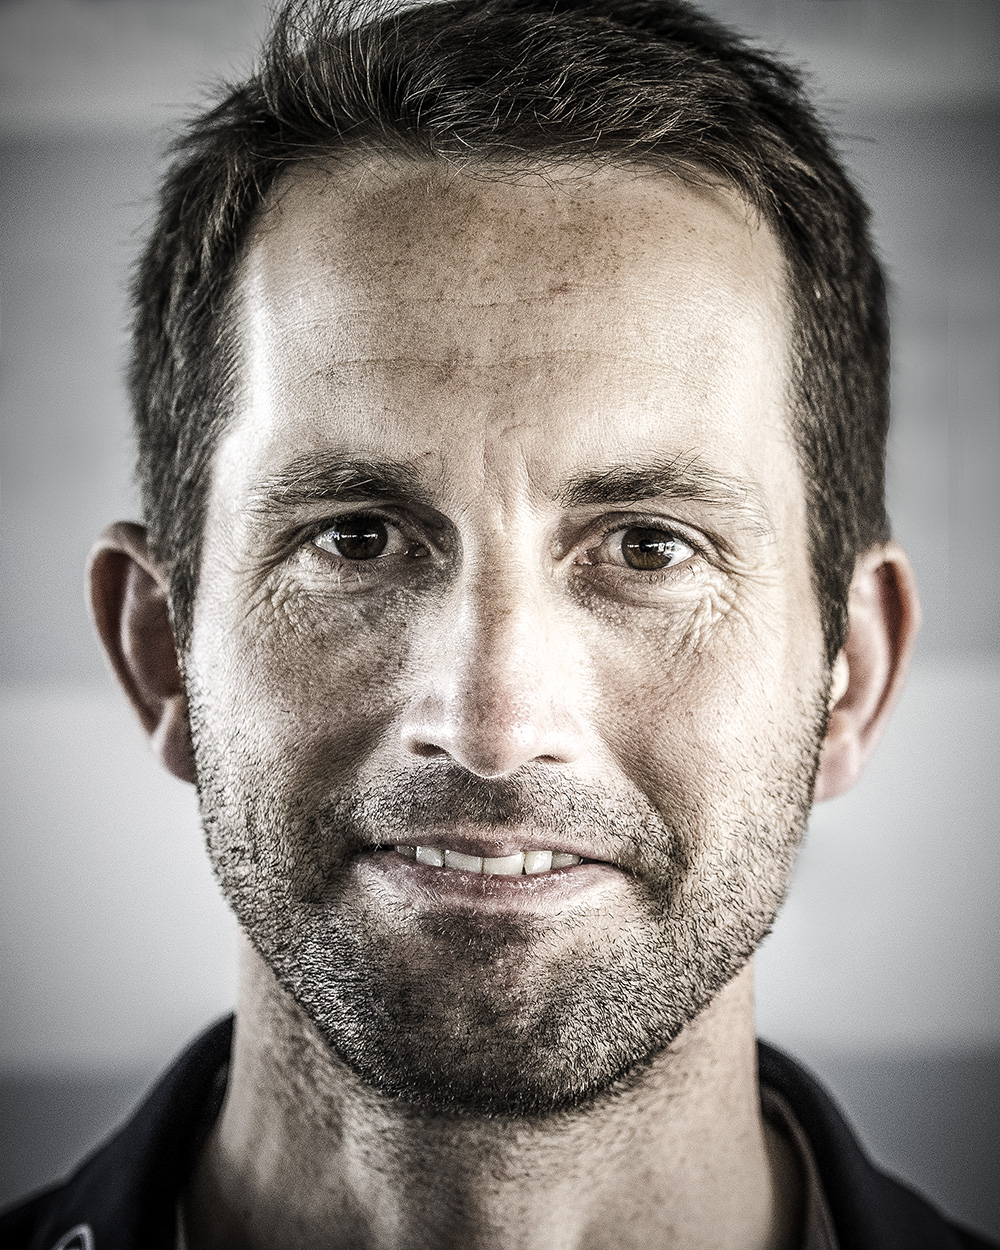 Olympic America Cup Sailor Ben Ainslie_Adam Jacobs Photography